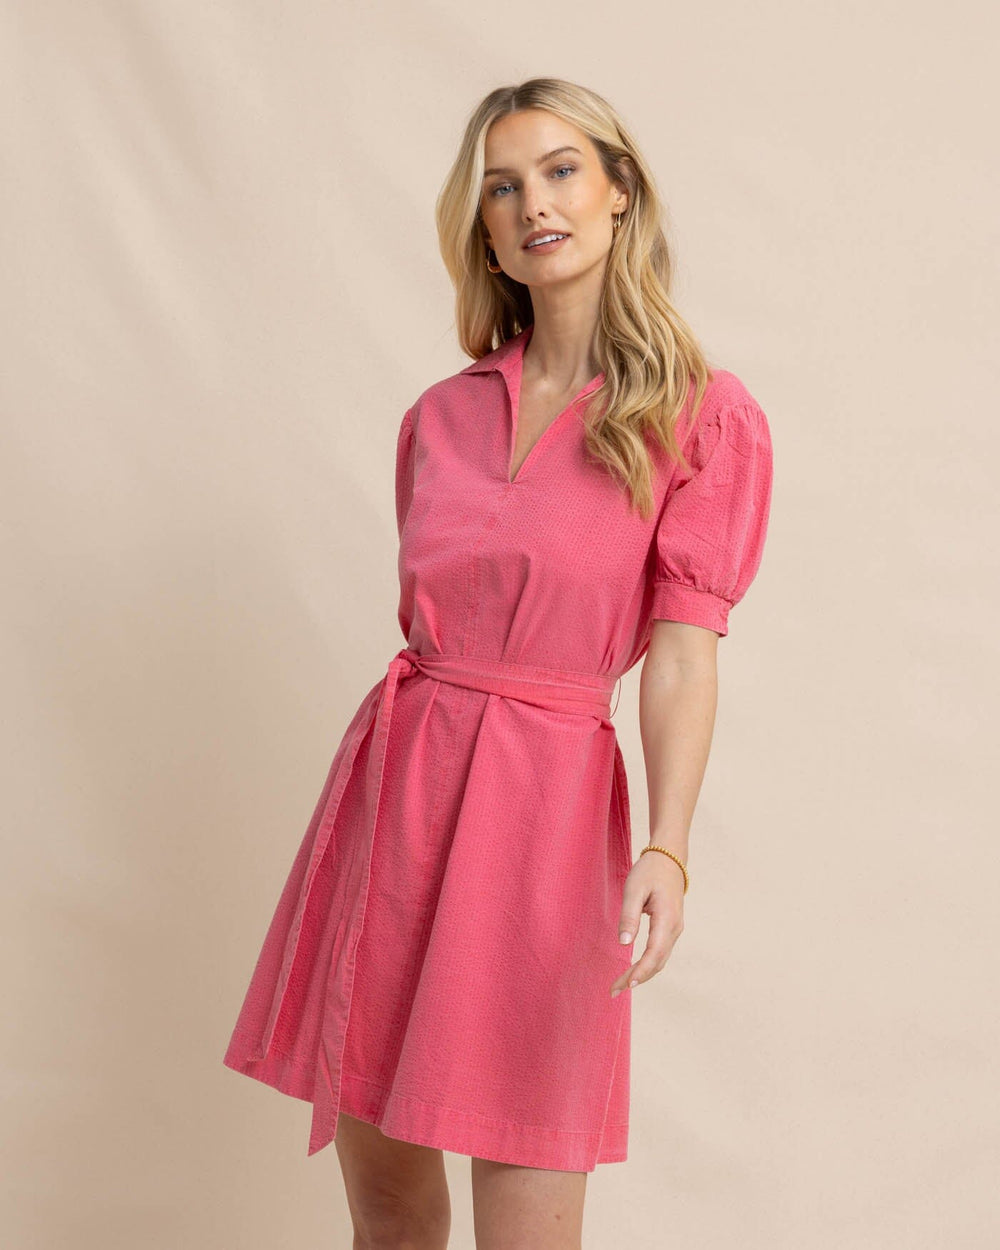 The front view of the Southern Tide Calan Washed Seersucker Dress by Southern Tide - Camelia Rose Pink